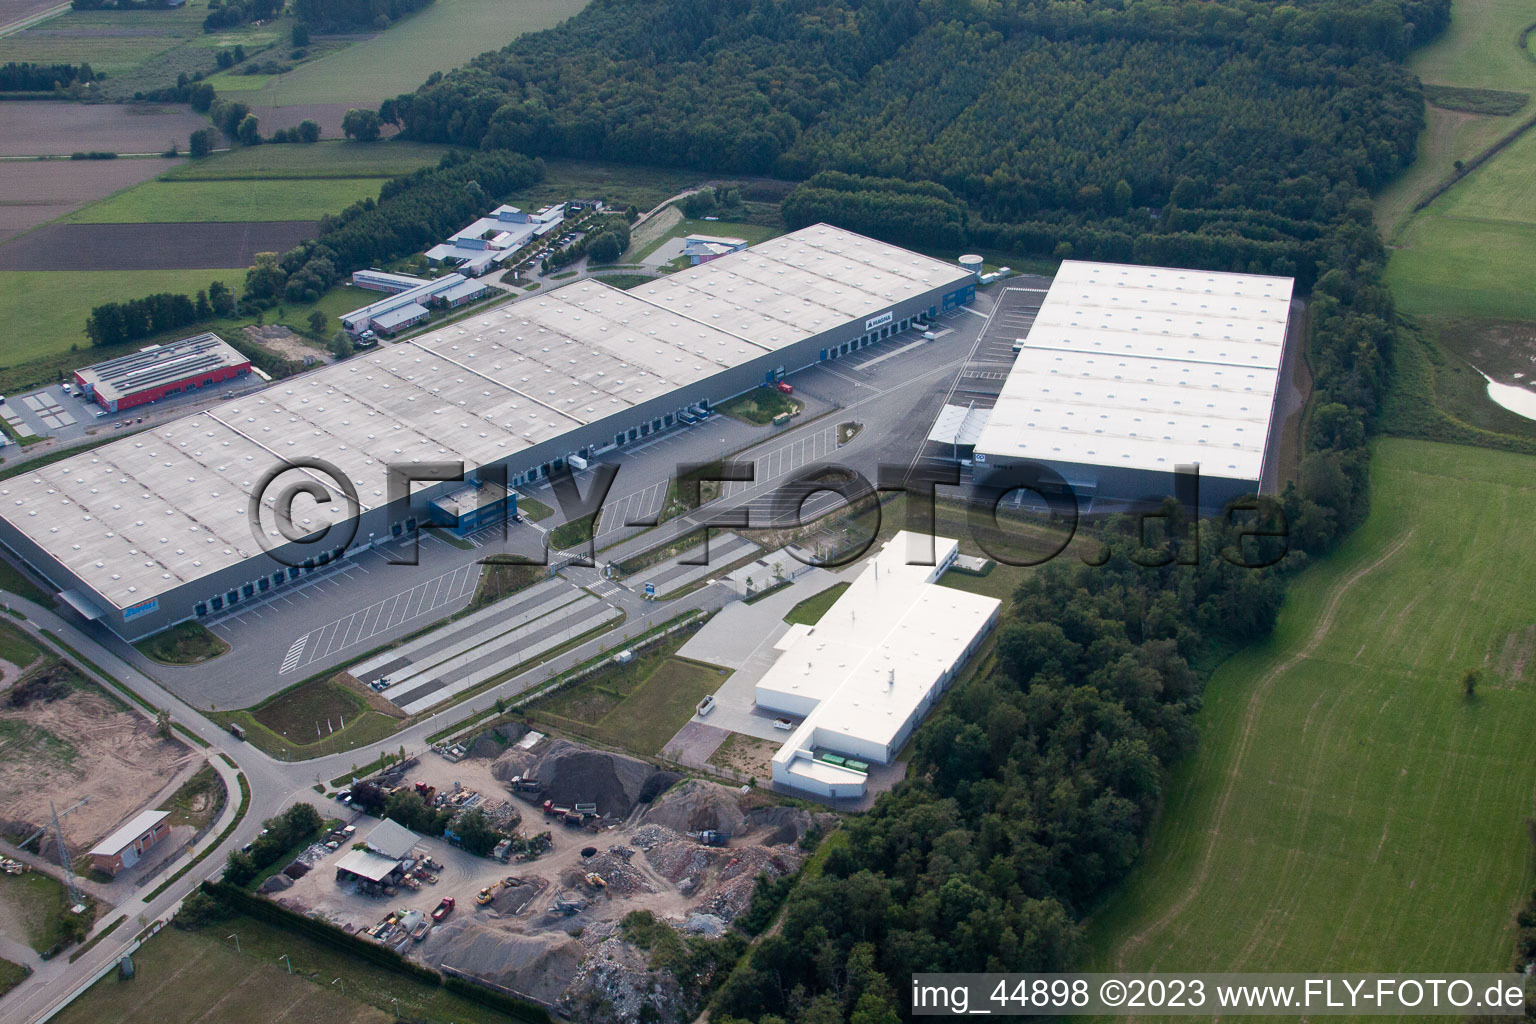 Aerial photograpy of Horst industrial area in the district Minderslachen in Kandel in the state Rhineland-Palatinate, Germany